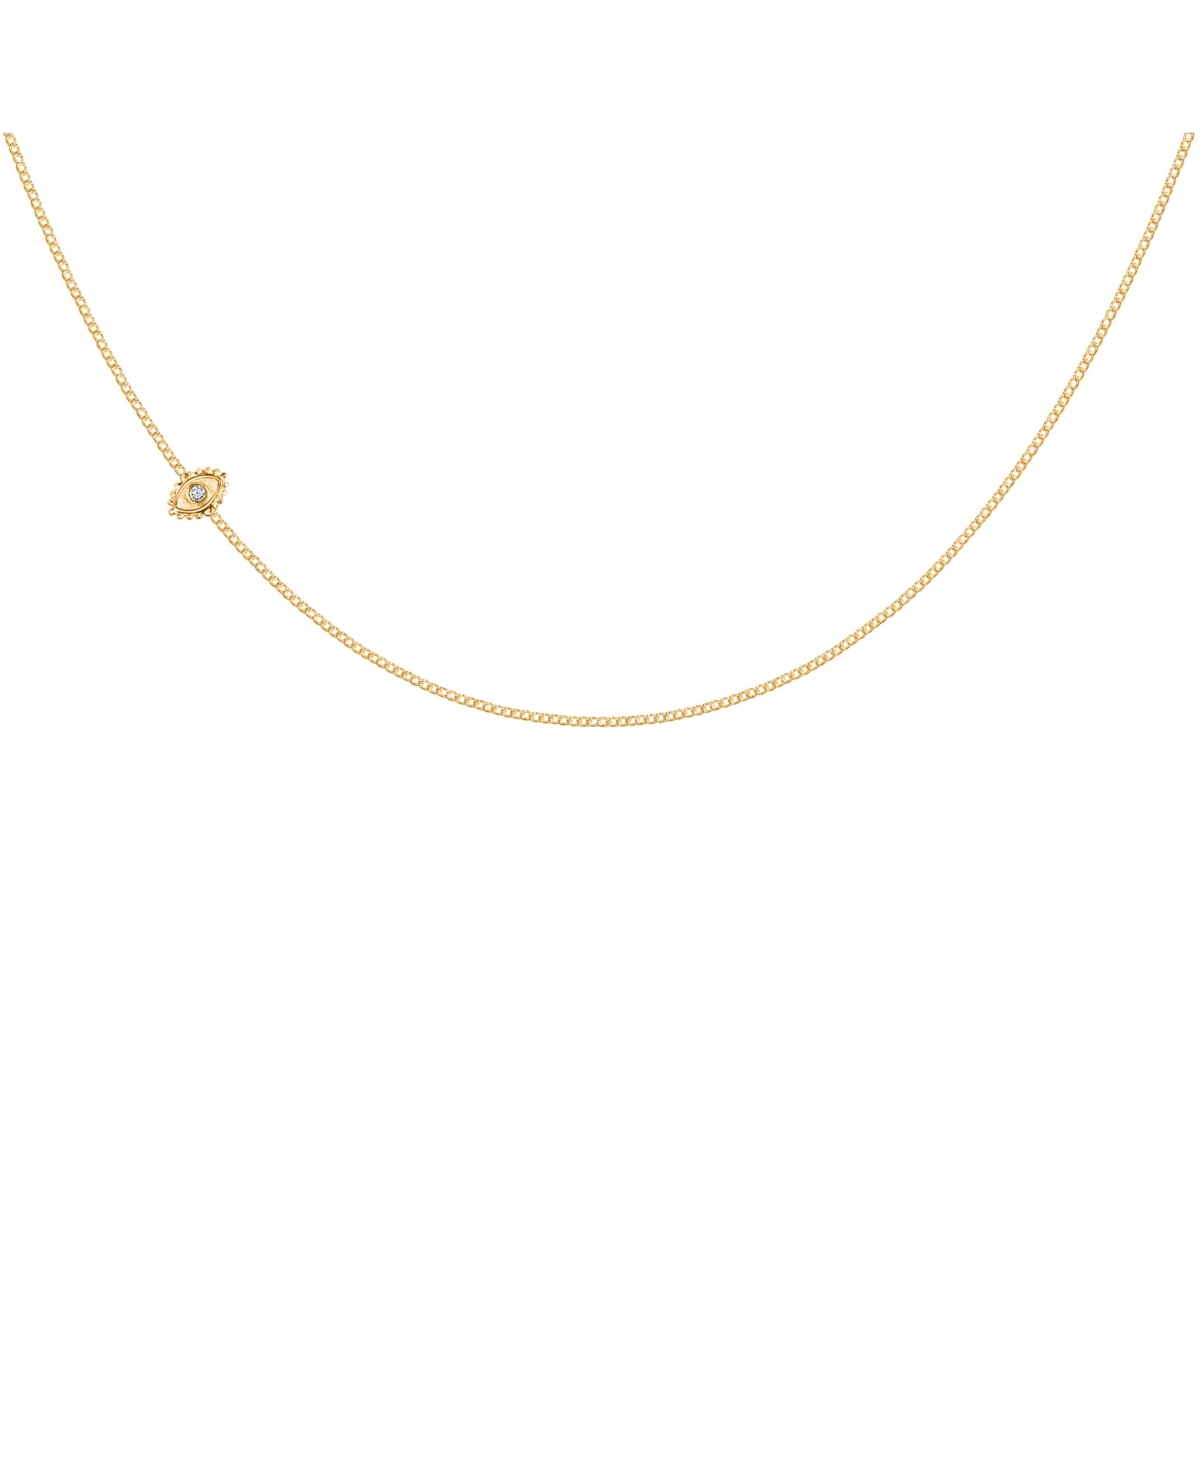 Protection Safeguarded Spirit Necklace - Gold